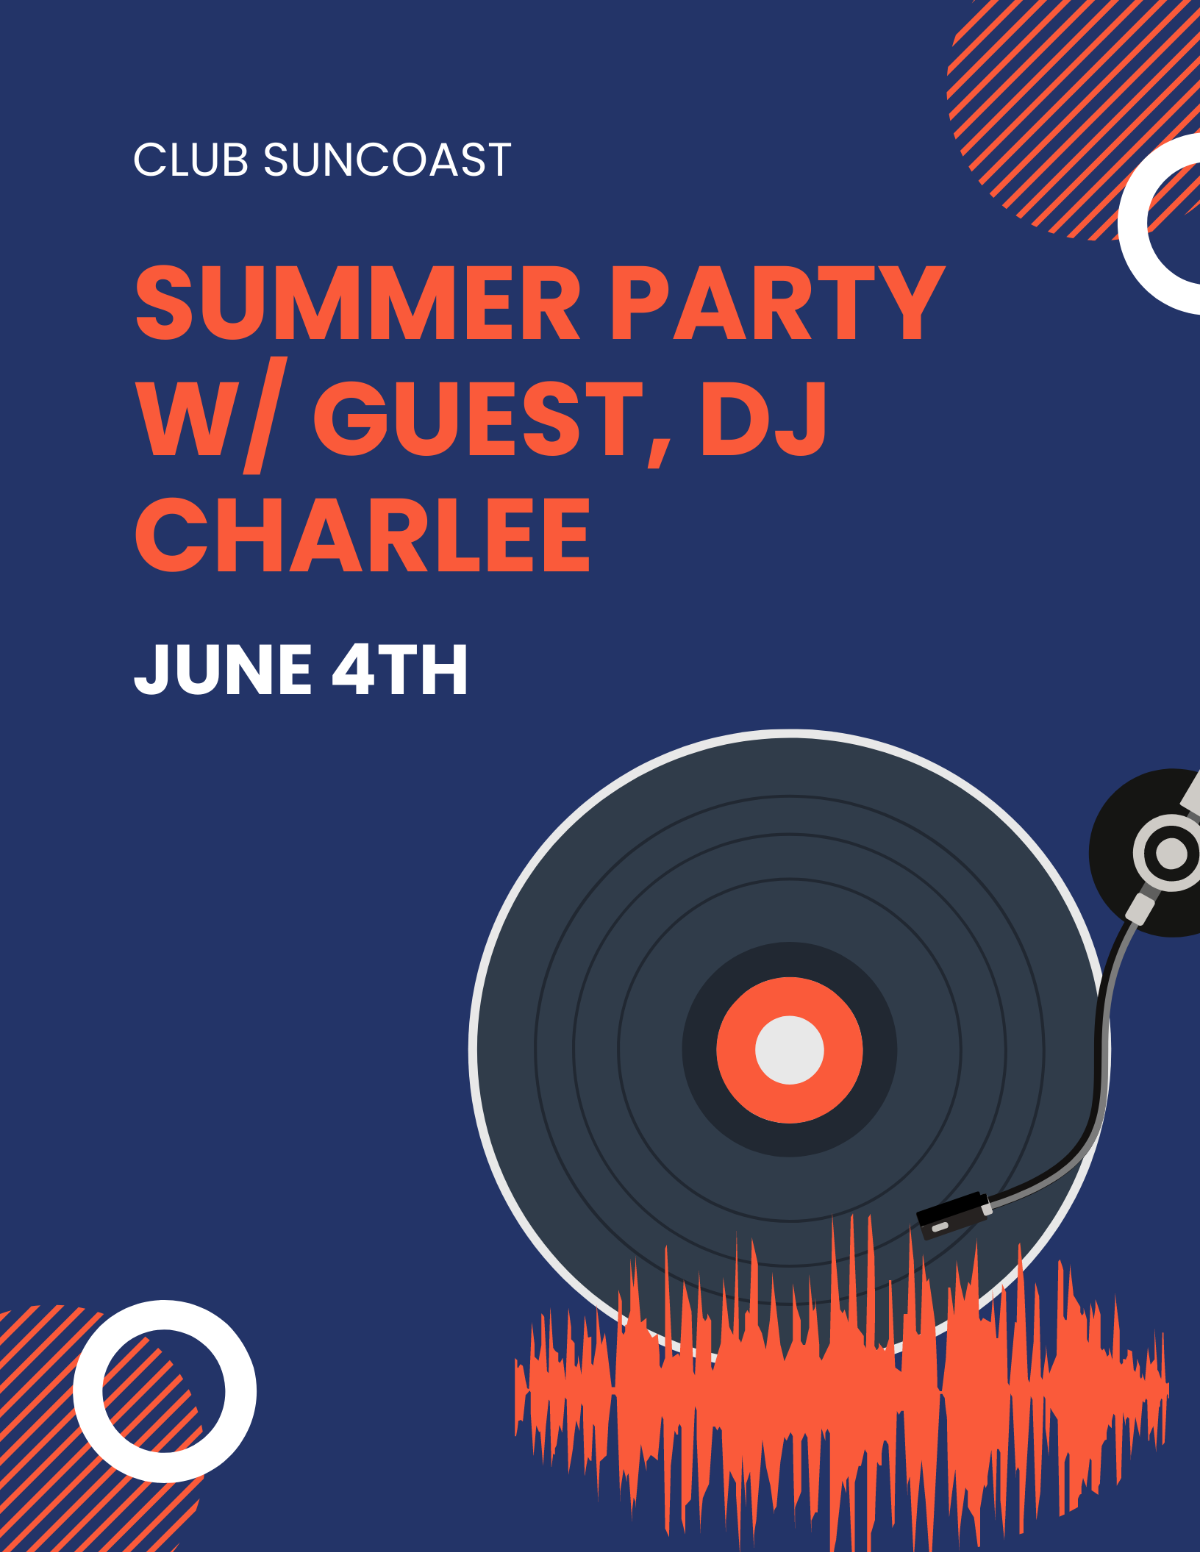 Free Guest Dj Party Flyer Template